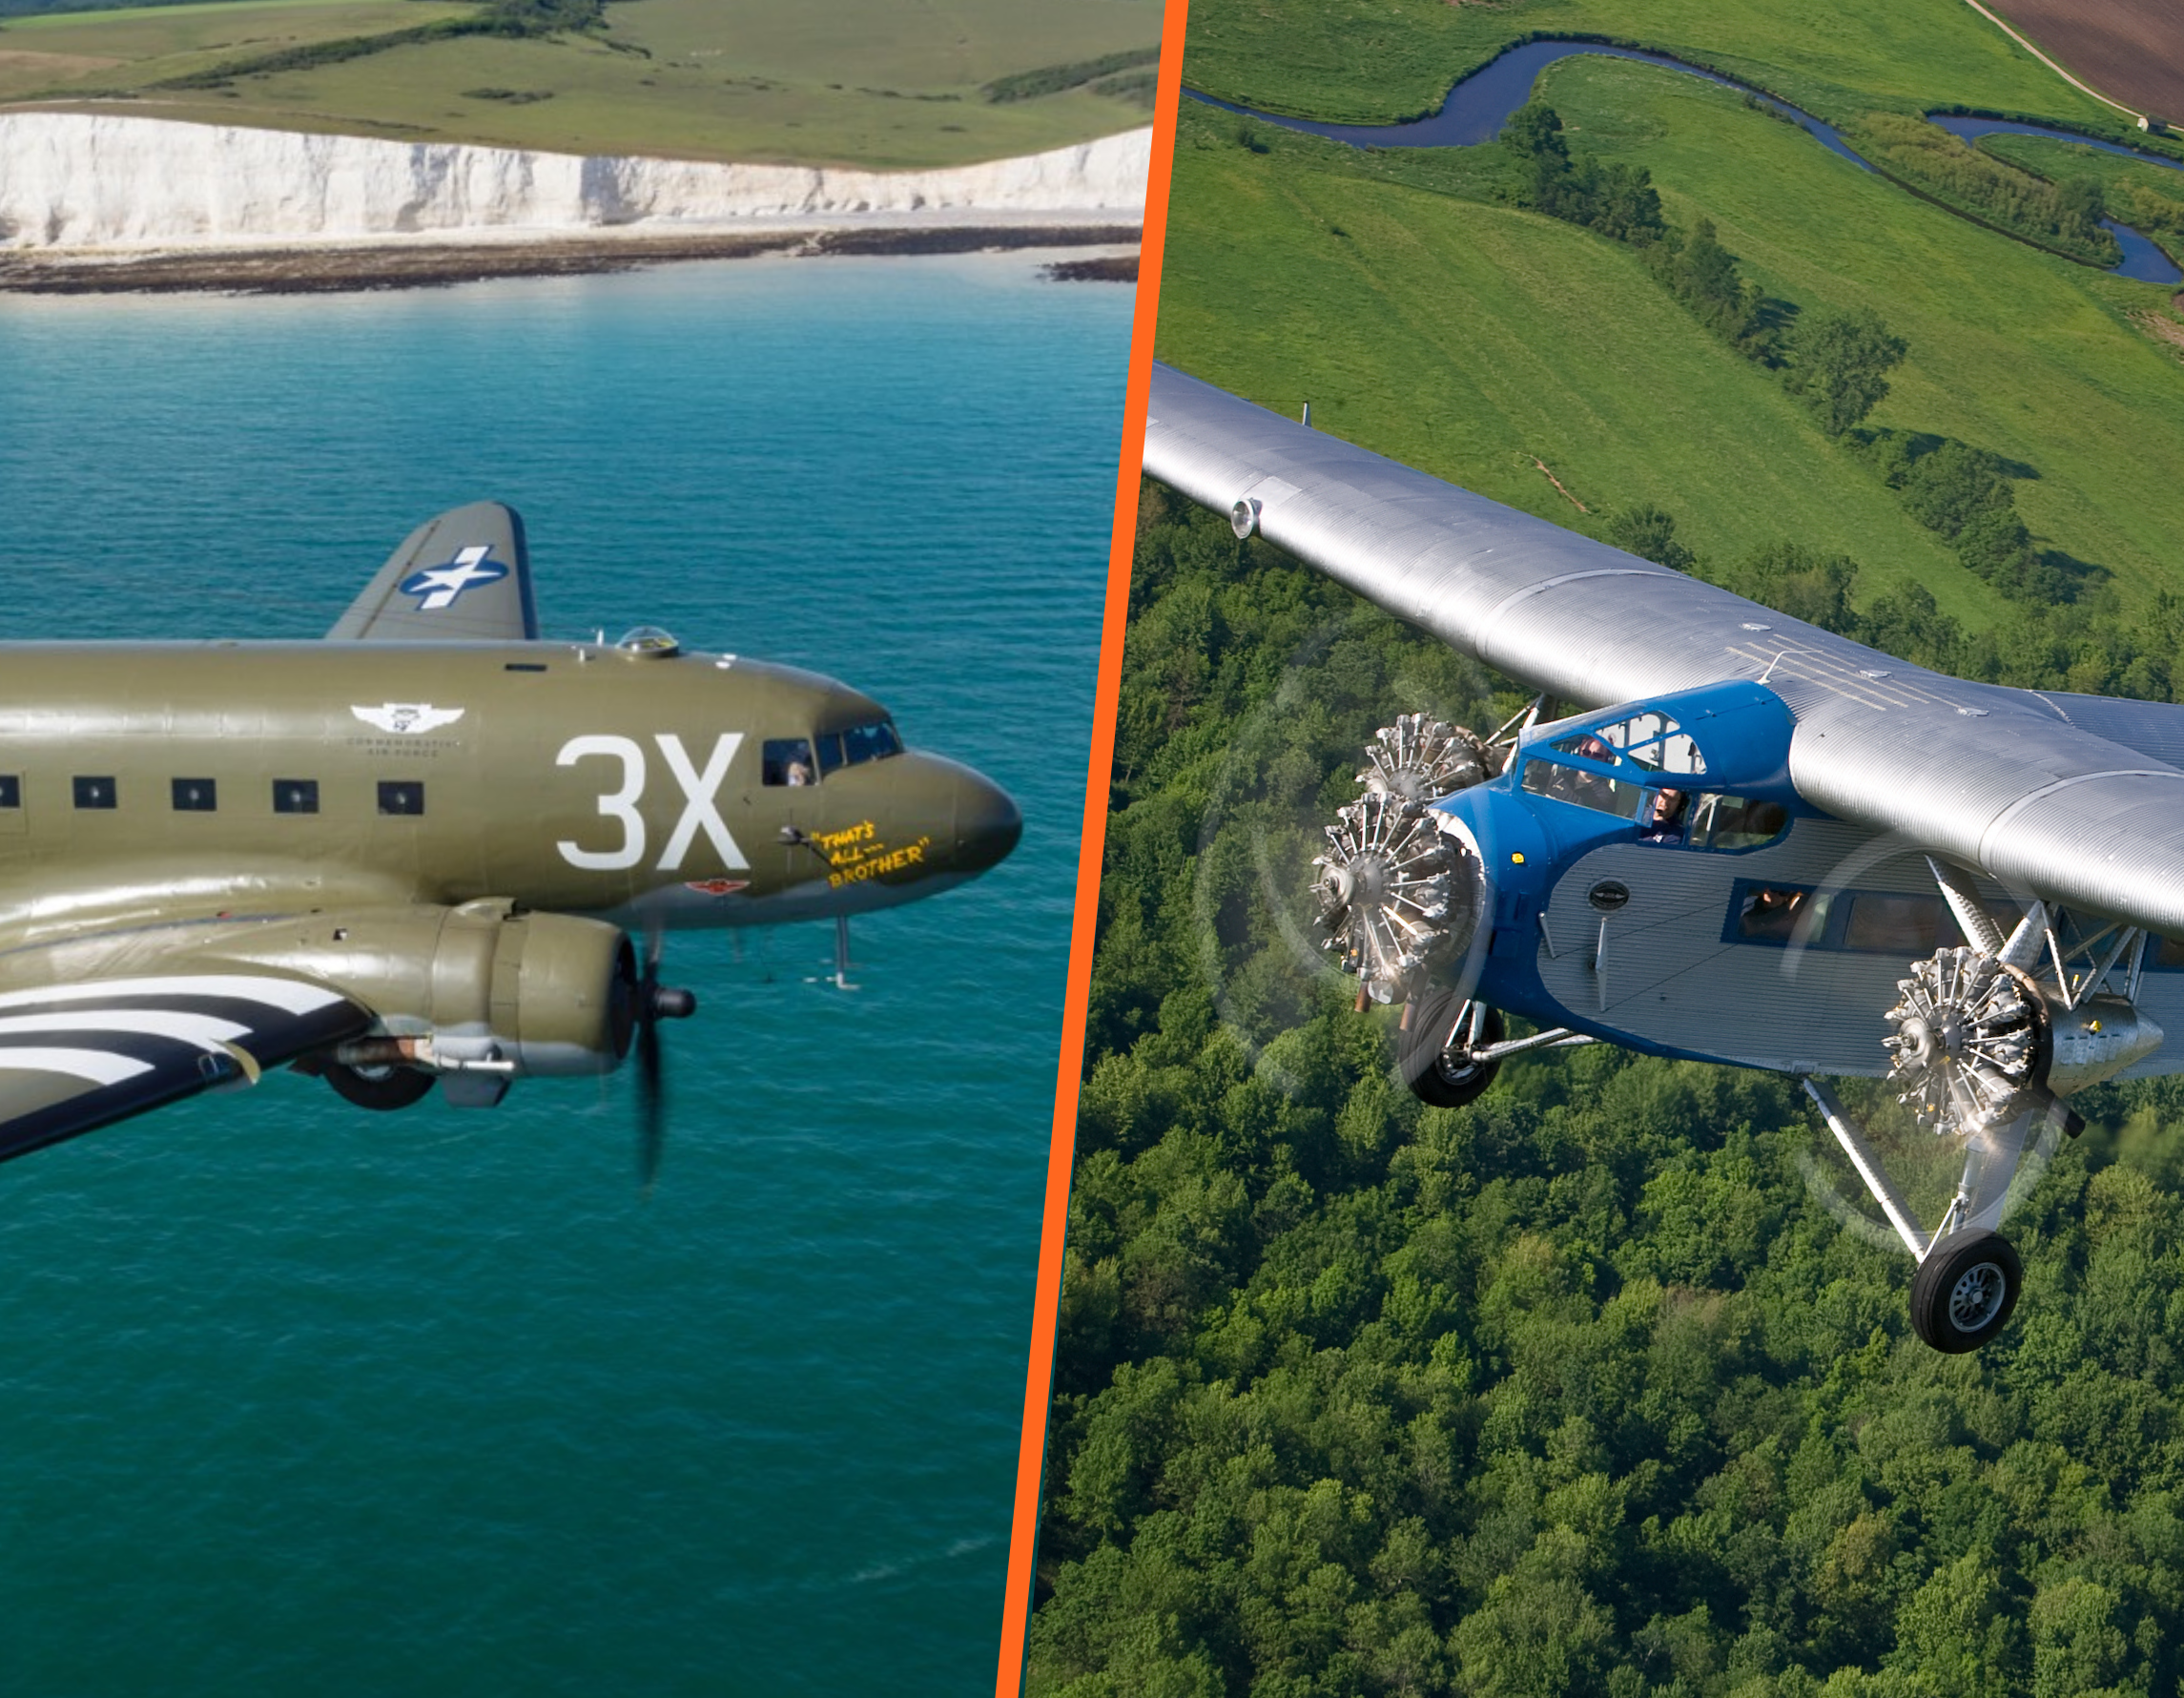 CAF C-47 and the EAA Ford Tri-motor